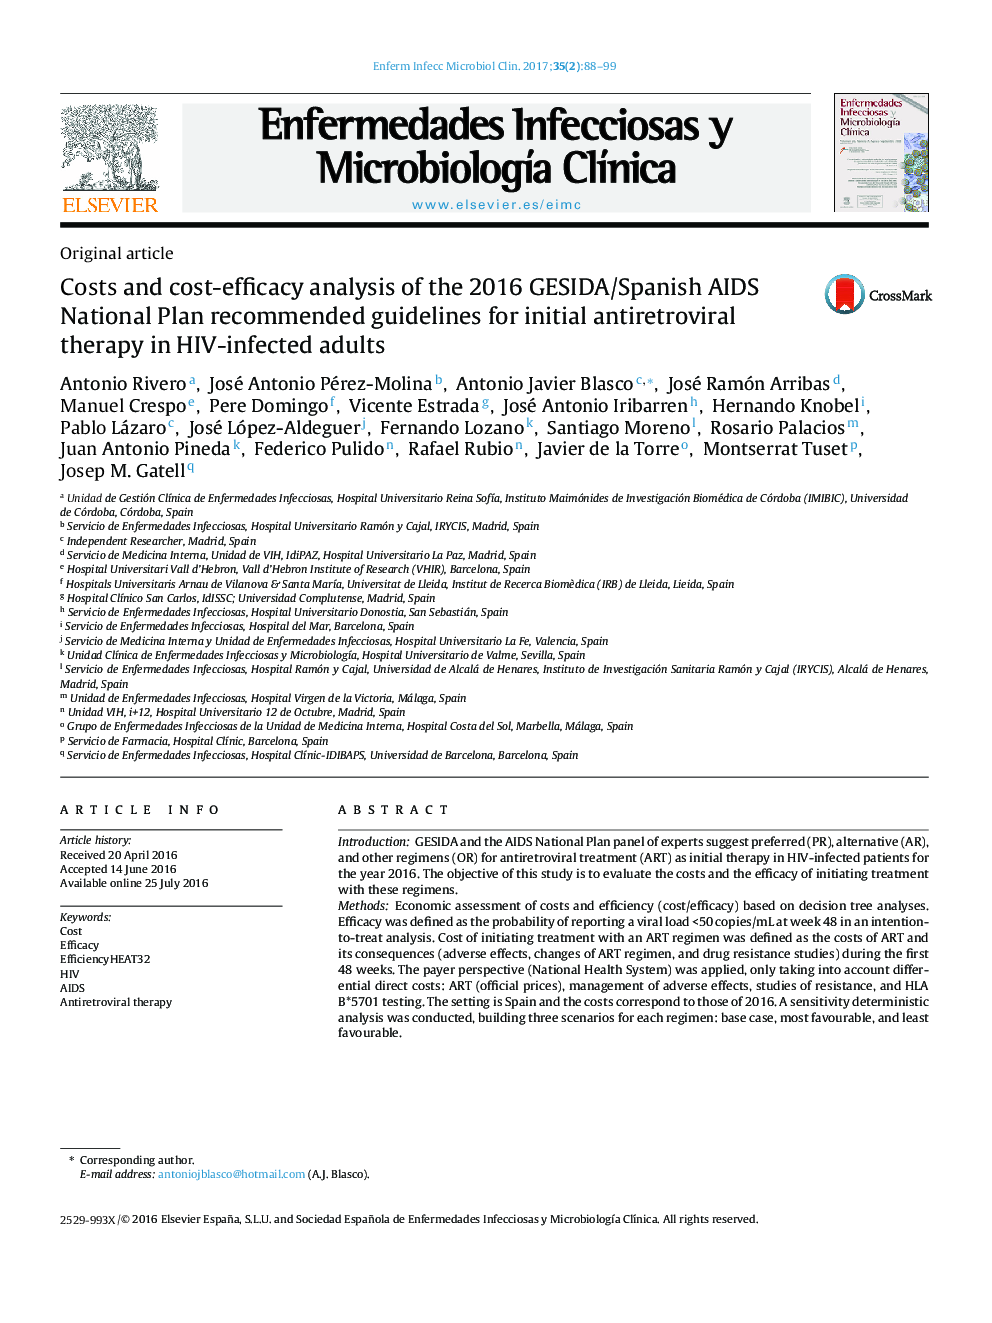 Costs and cost-efficacy analysis of the 2016 GESIDA/Spanish AIDS National Plan recommended guidelines for initial antiretroviral therapy in HIV-infected adults